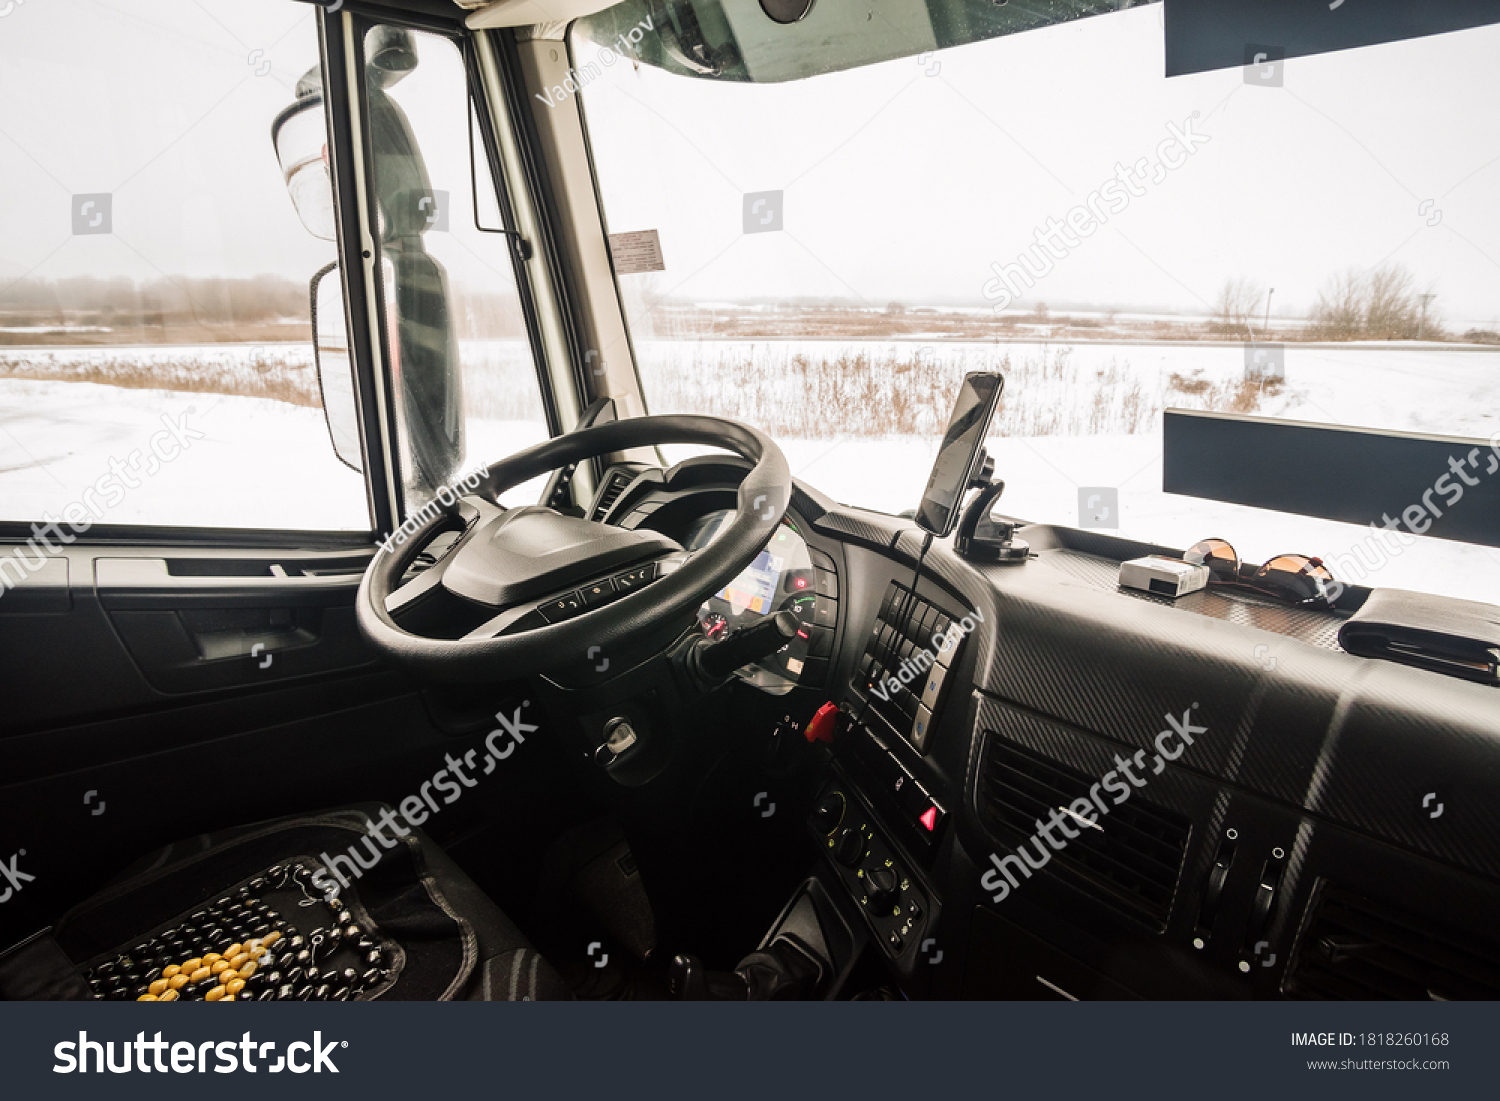 The driver's seat in the cab of the truck, inside view #1818260168